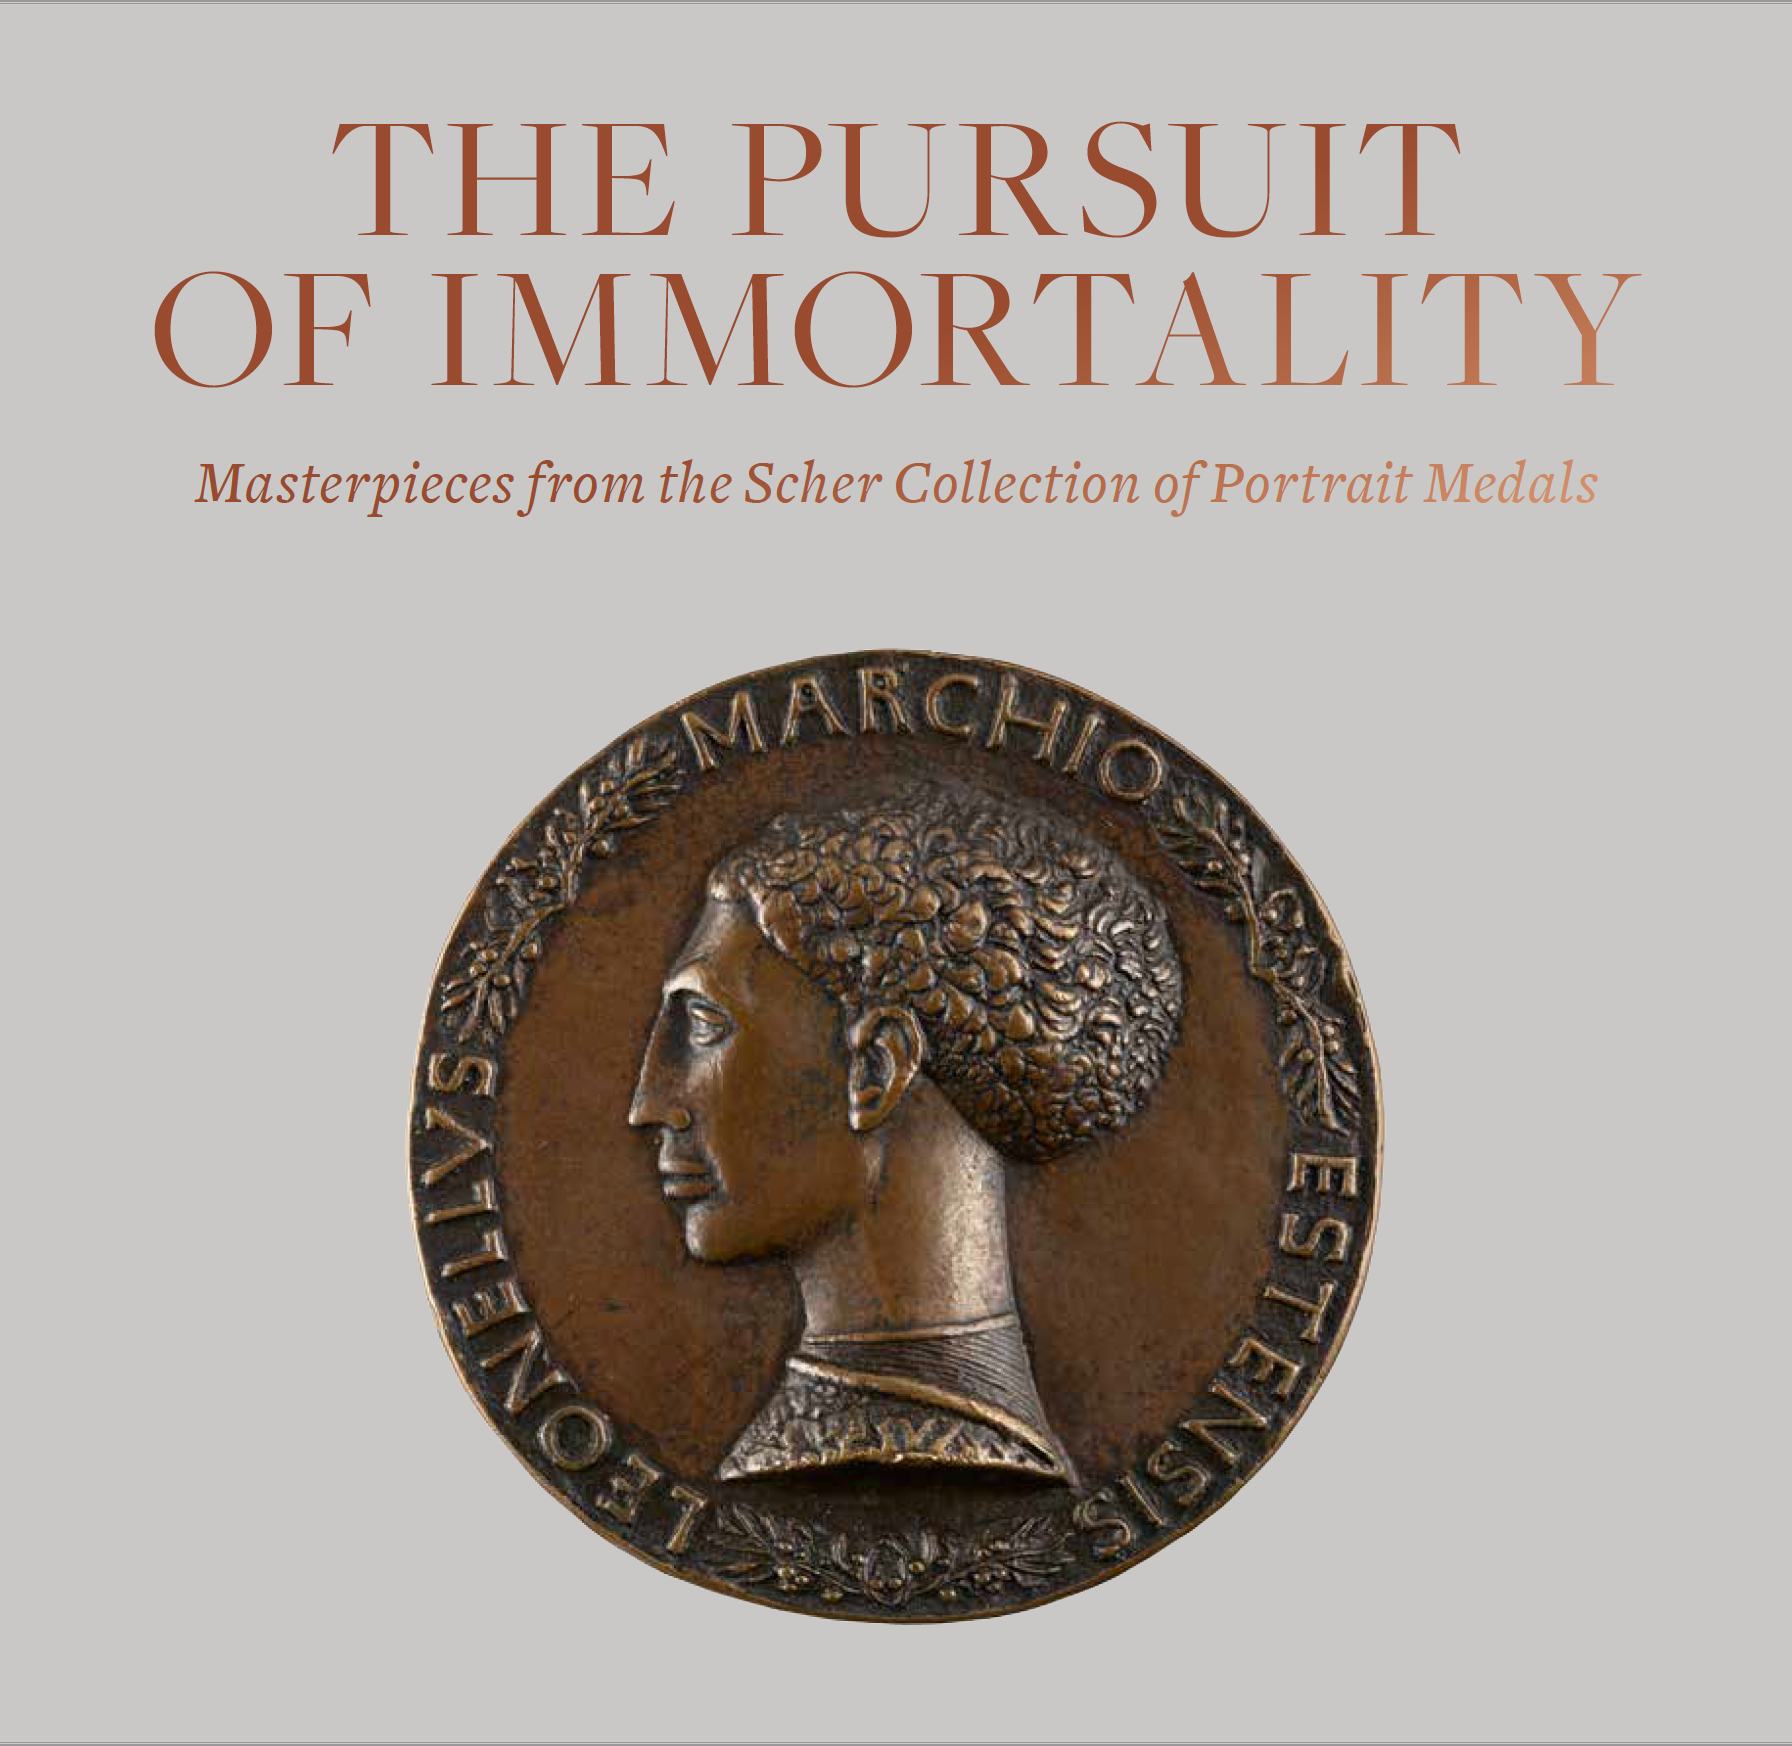 Cover of the catalogue the Pursuit of Immortality with link to buy